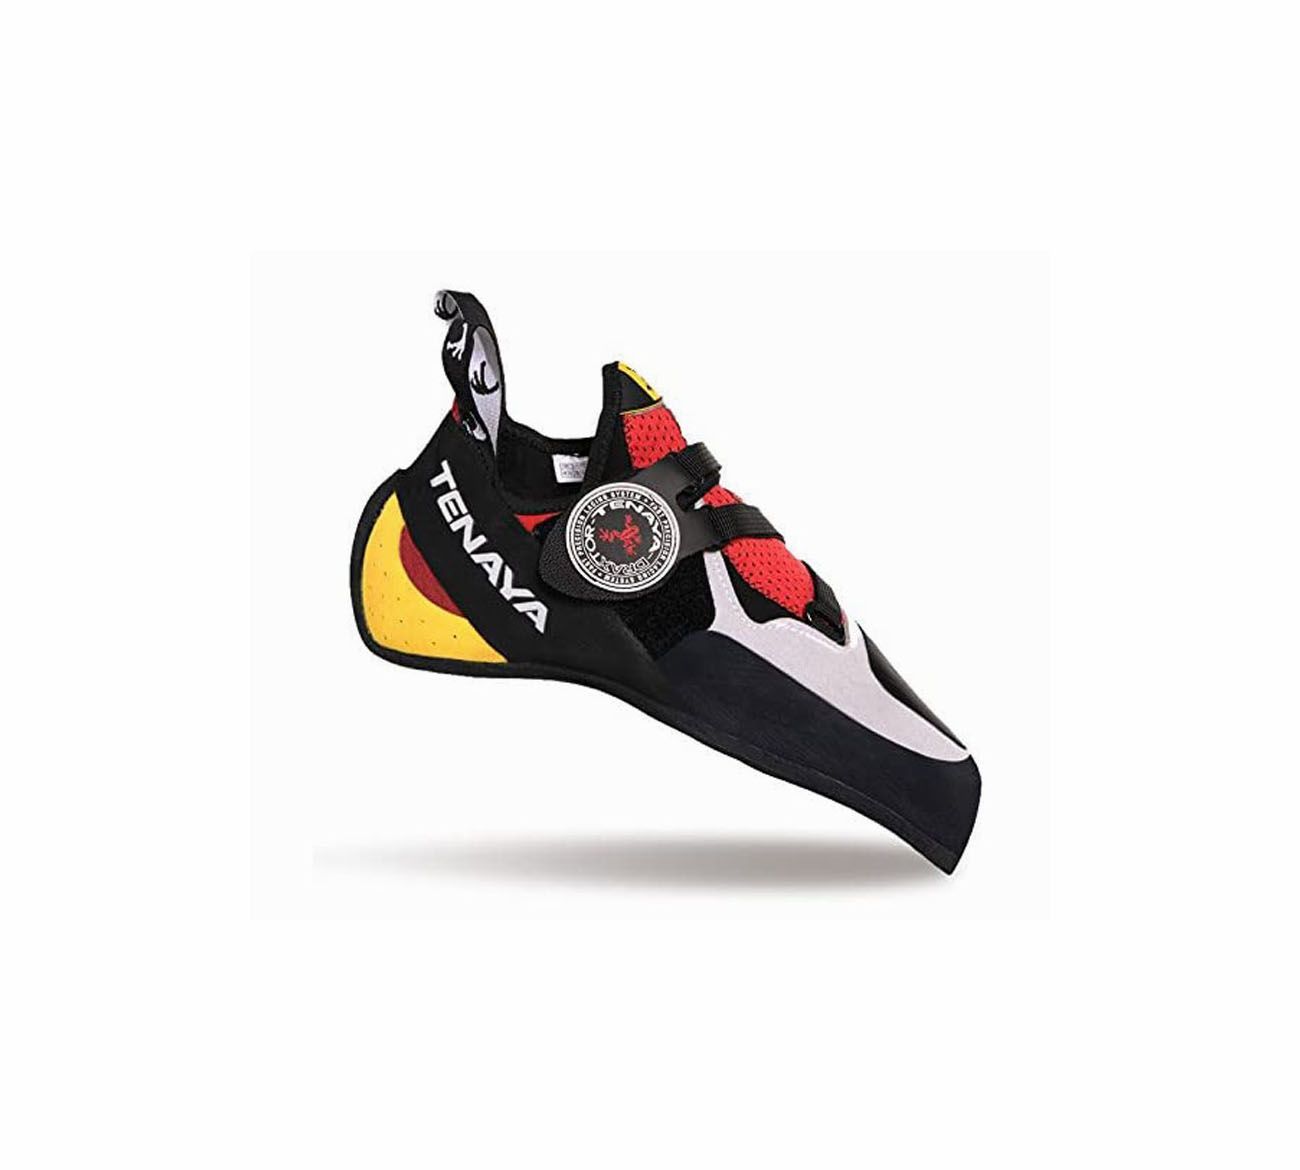 places to buy climbing shoes